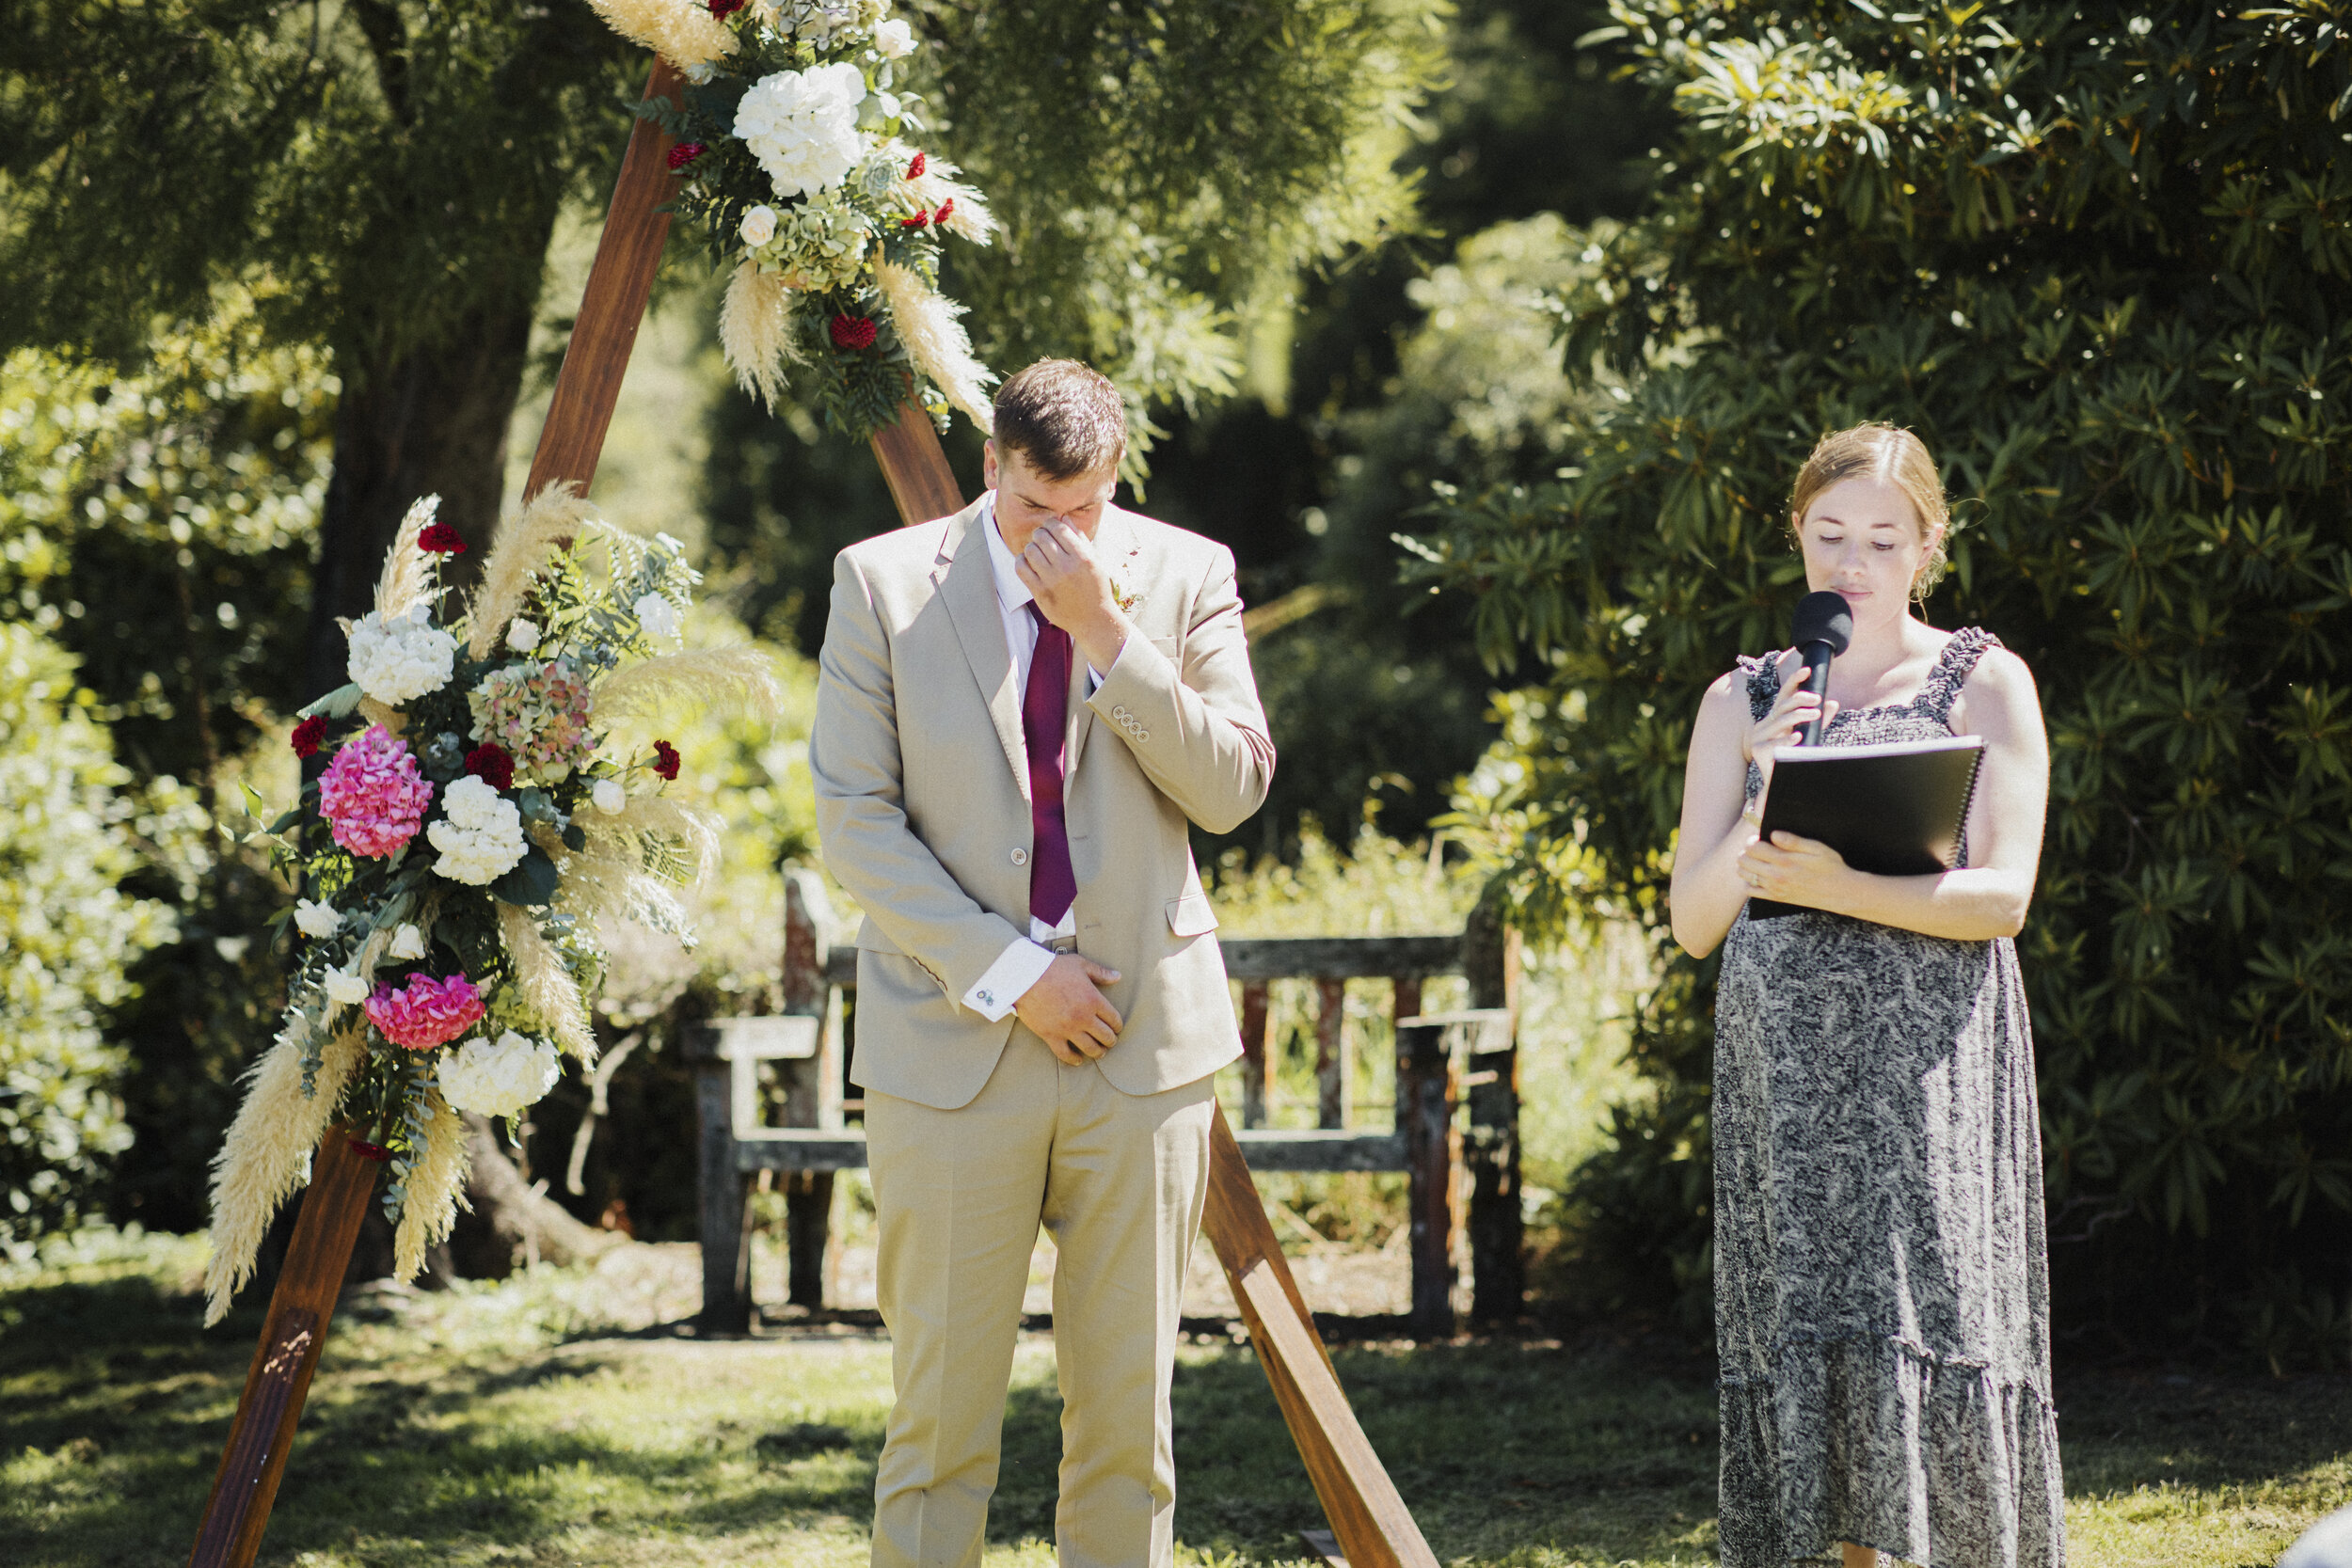 Groom crying at front of aisle as he awaits bride